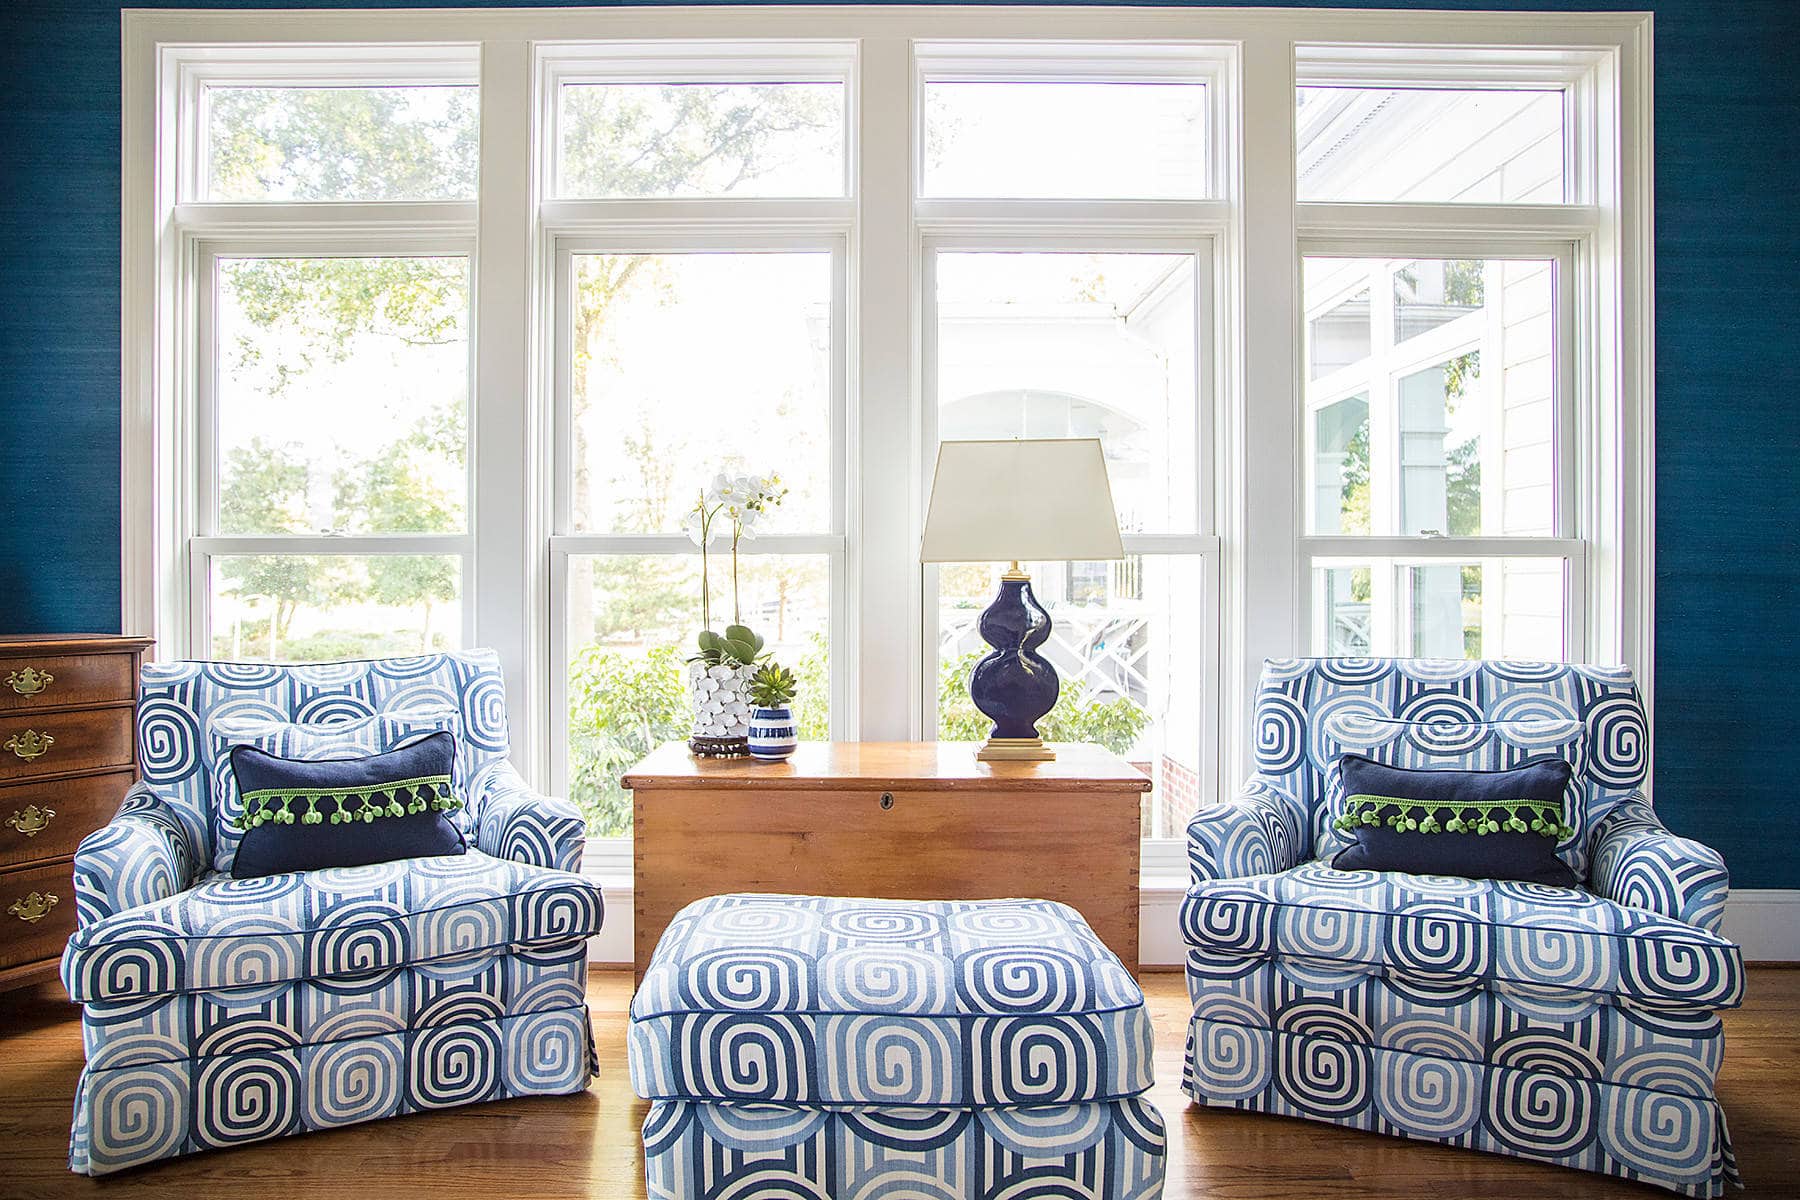 Home tour featuring living room in a traditional style featuring two armchairs and ottoman in geometric white and blue pattern